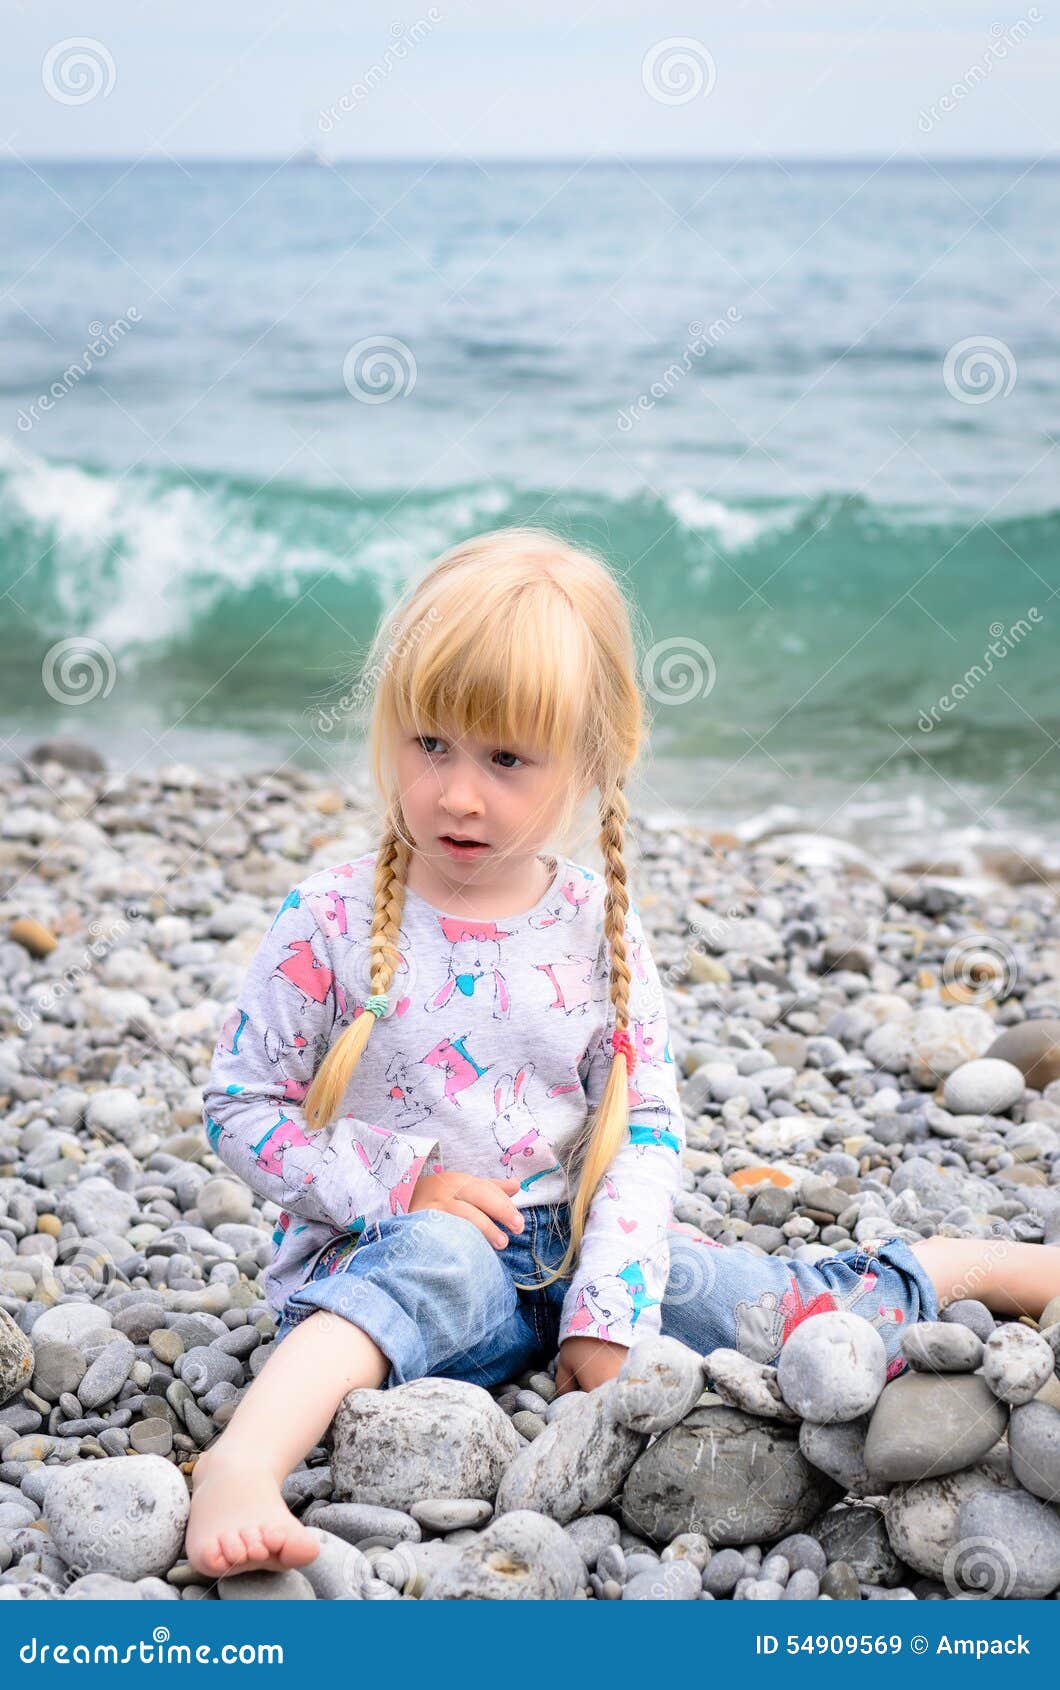 Blond Girl Building Stone Wall on Rocky Beach Stock Image - Image of ...